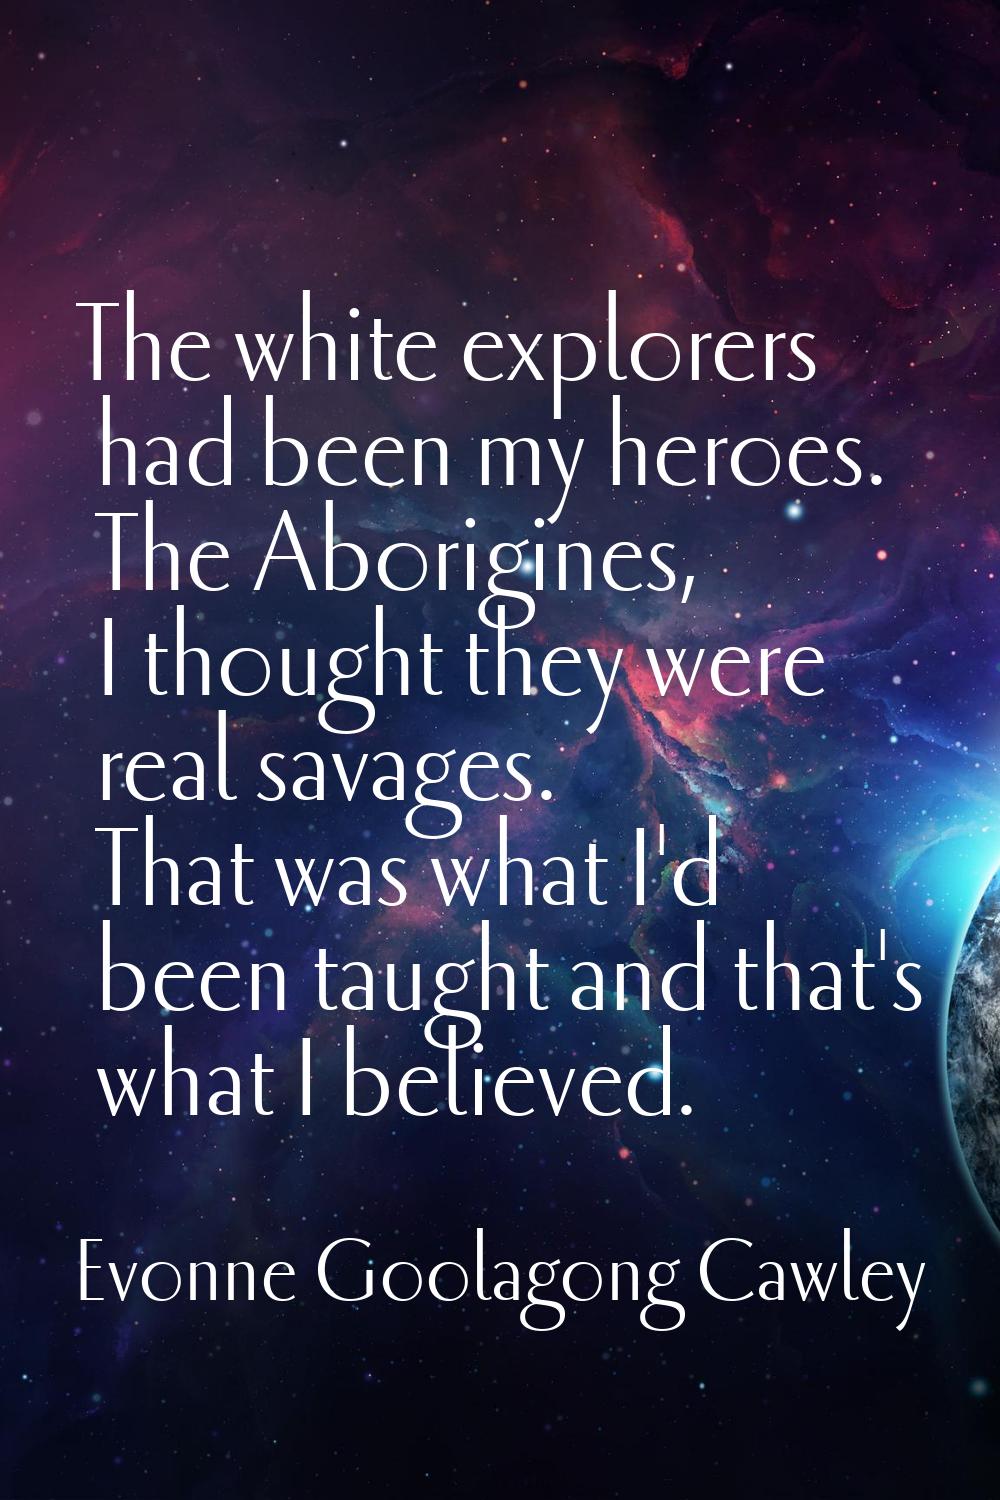 The white explorers had been my heroes. The Aborigines, I thought they were real savages. That was 